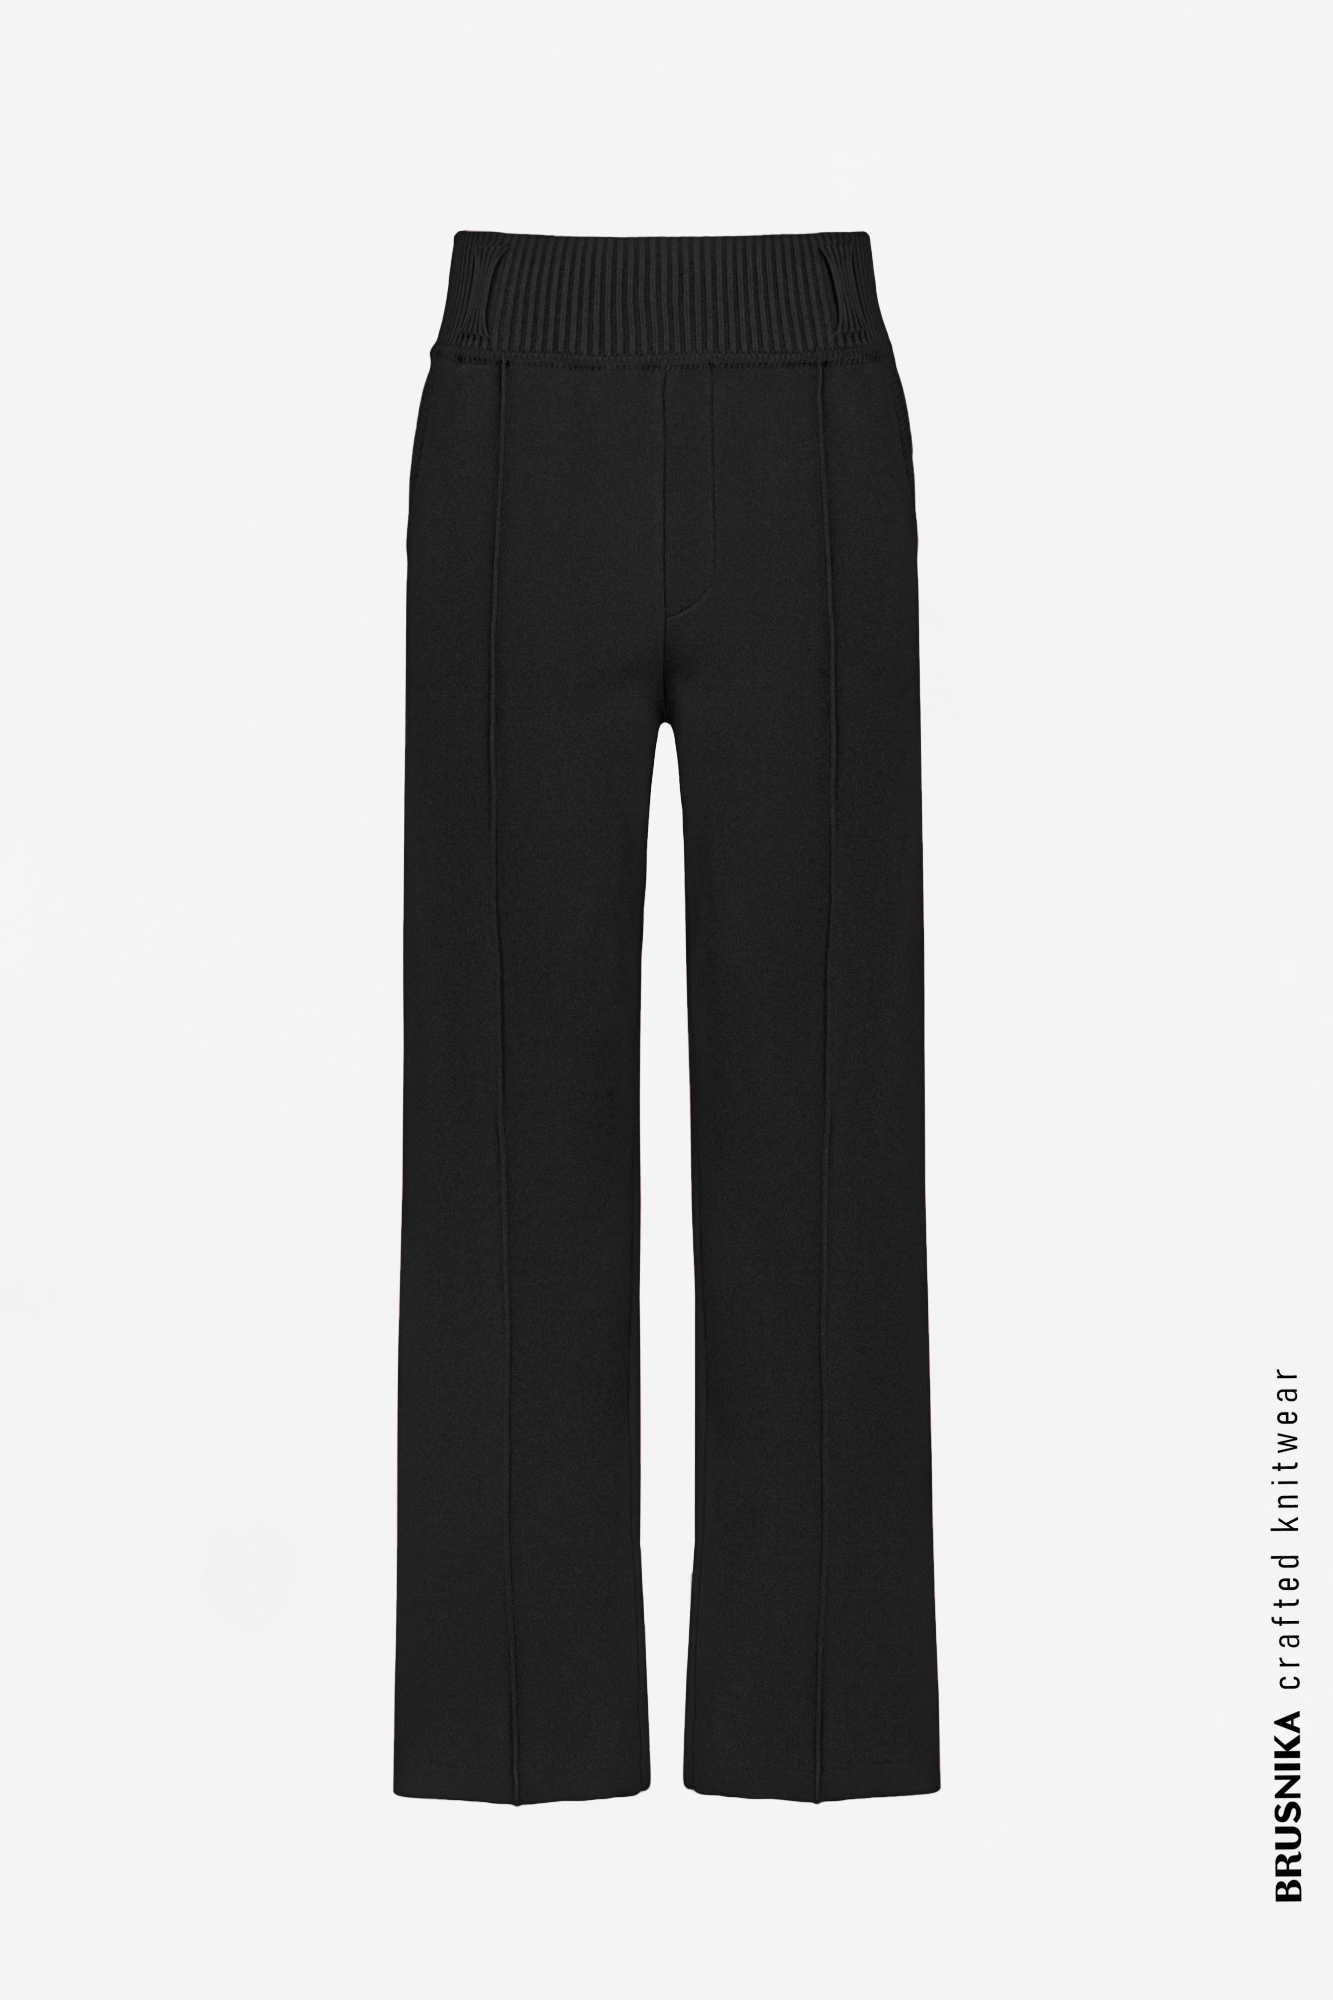 Trousers 3070-01 Black from BRUSNiKA